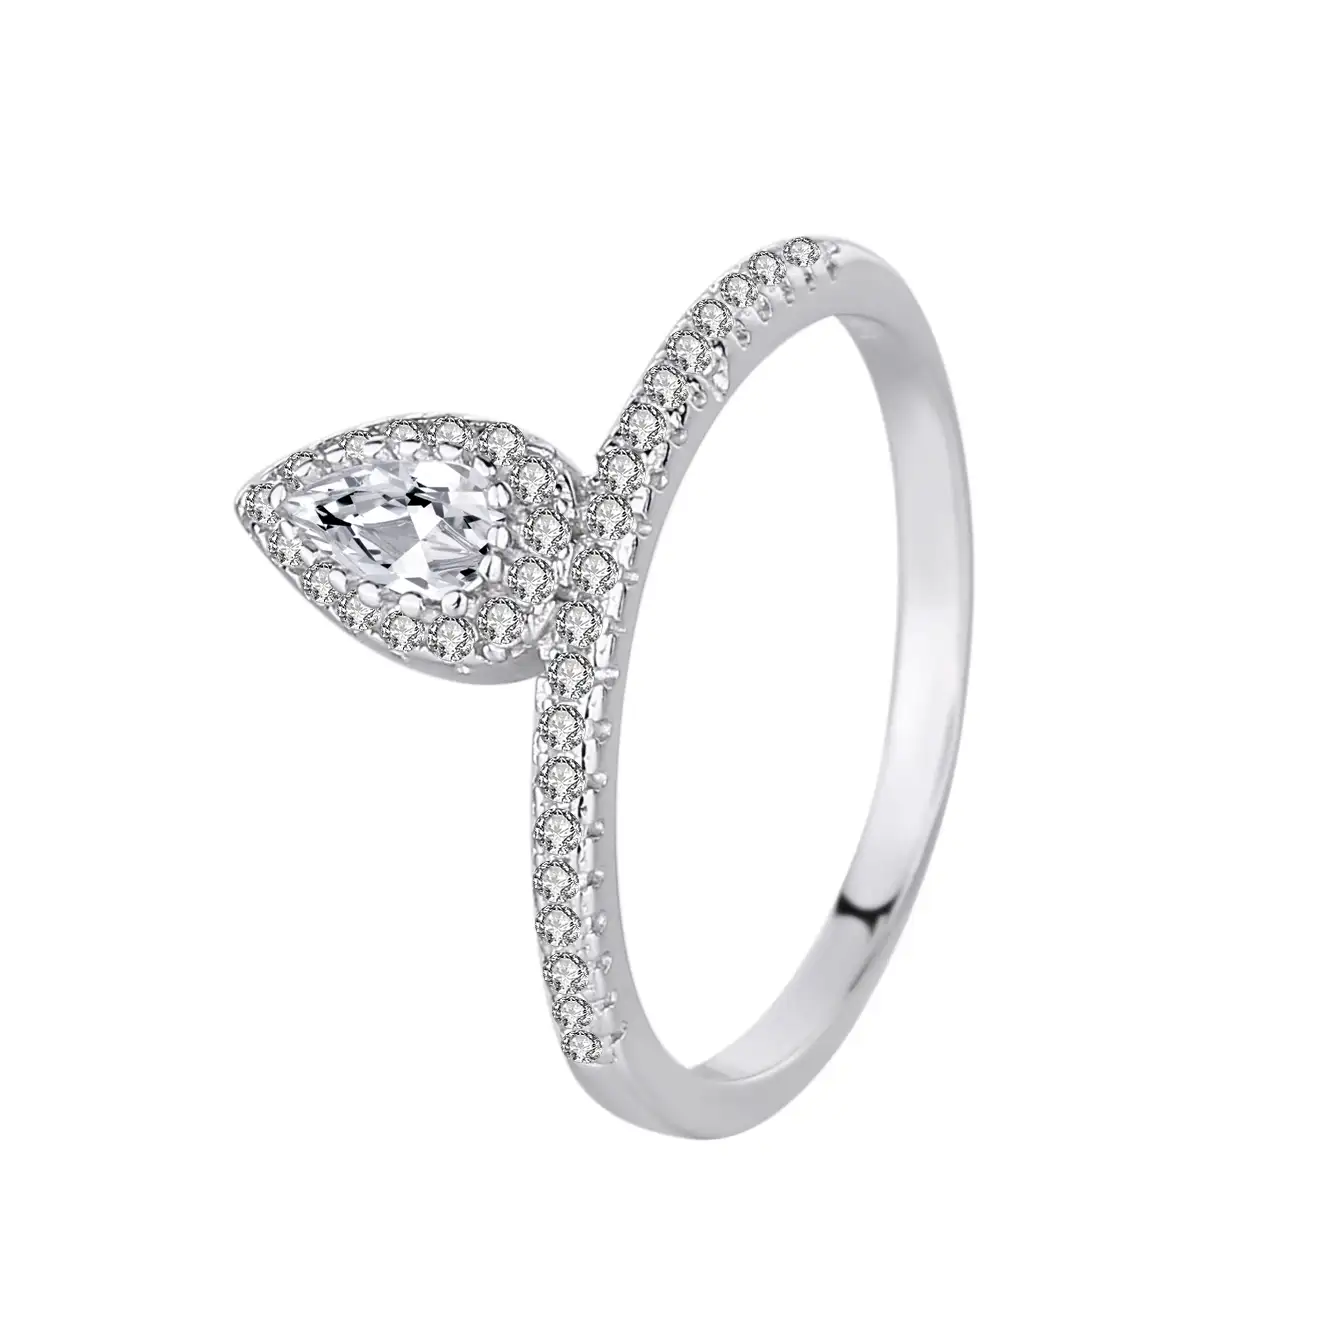 Silver Cubic Zirconia Solitaire Ring 70200046